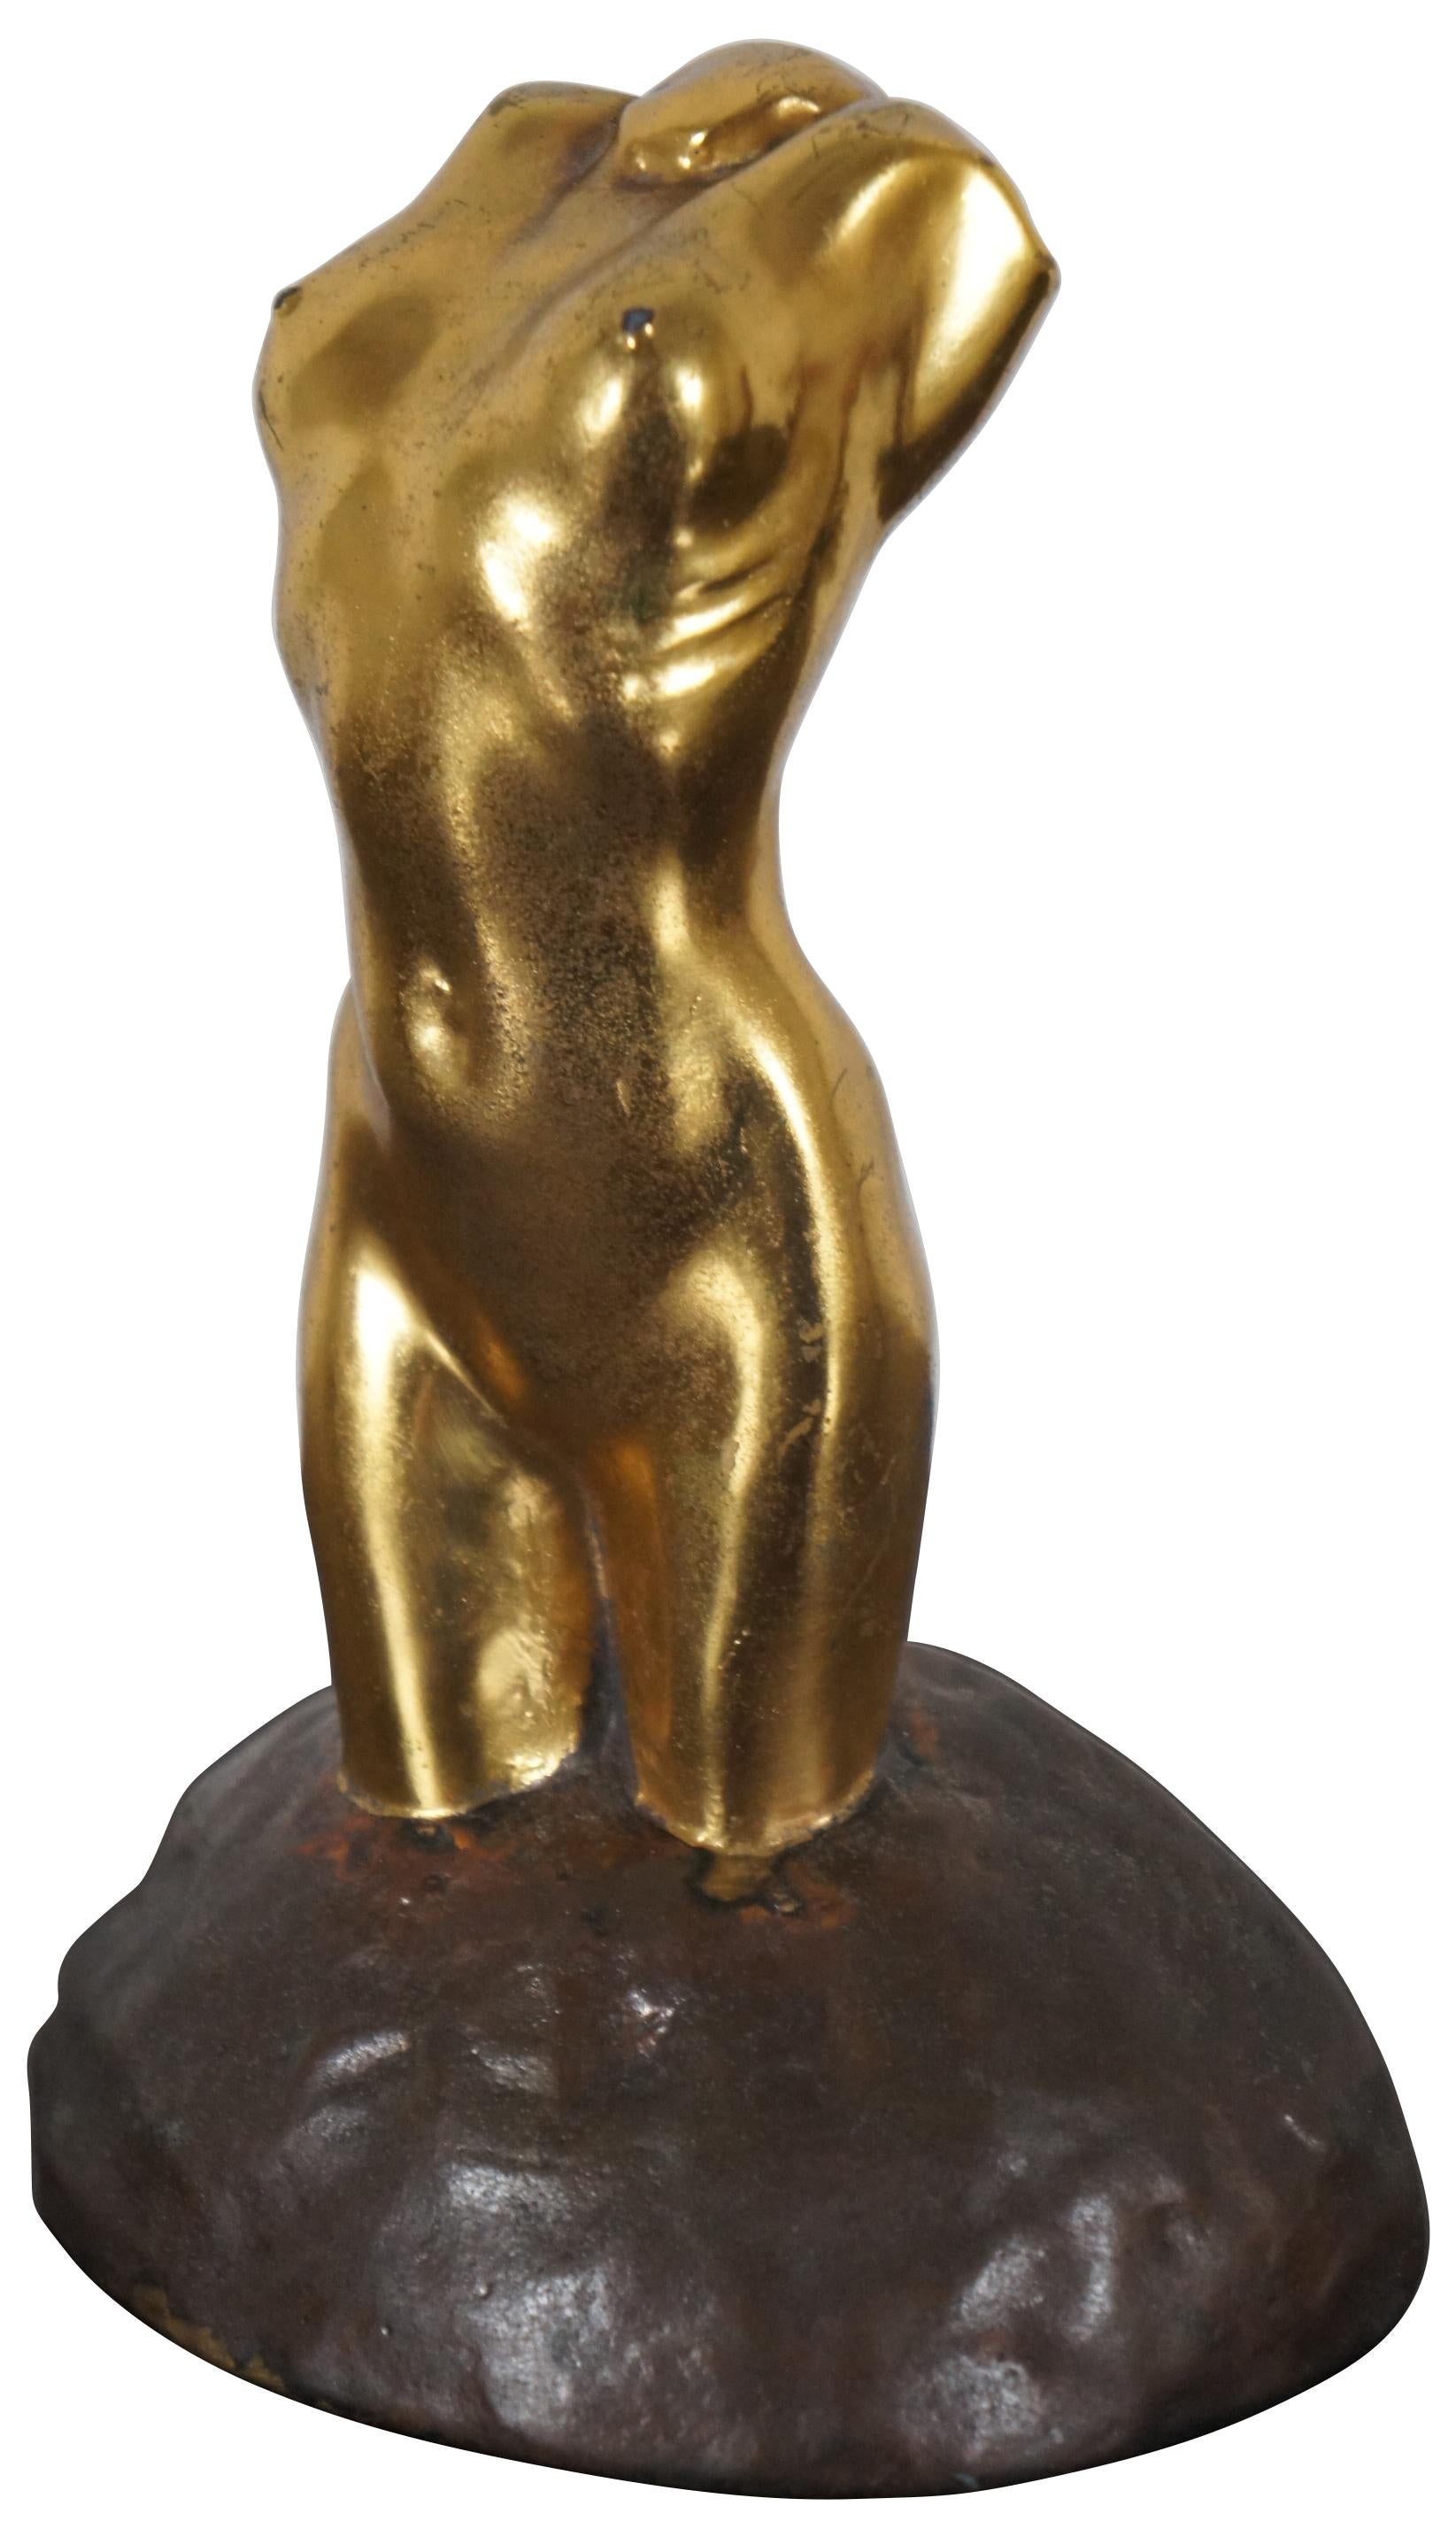 Antique McClelland Barclay bronze figurine in the shape of a neoclassically inspired female figure without arms or head, embedded in a half round base and gilded in bright gold.
      